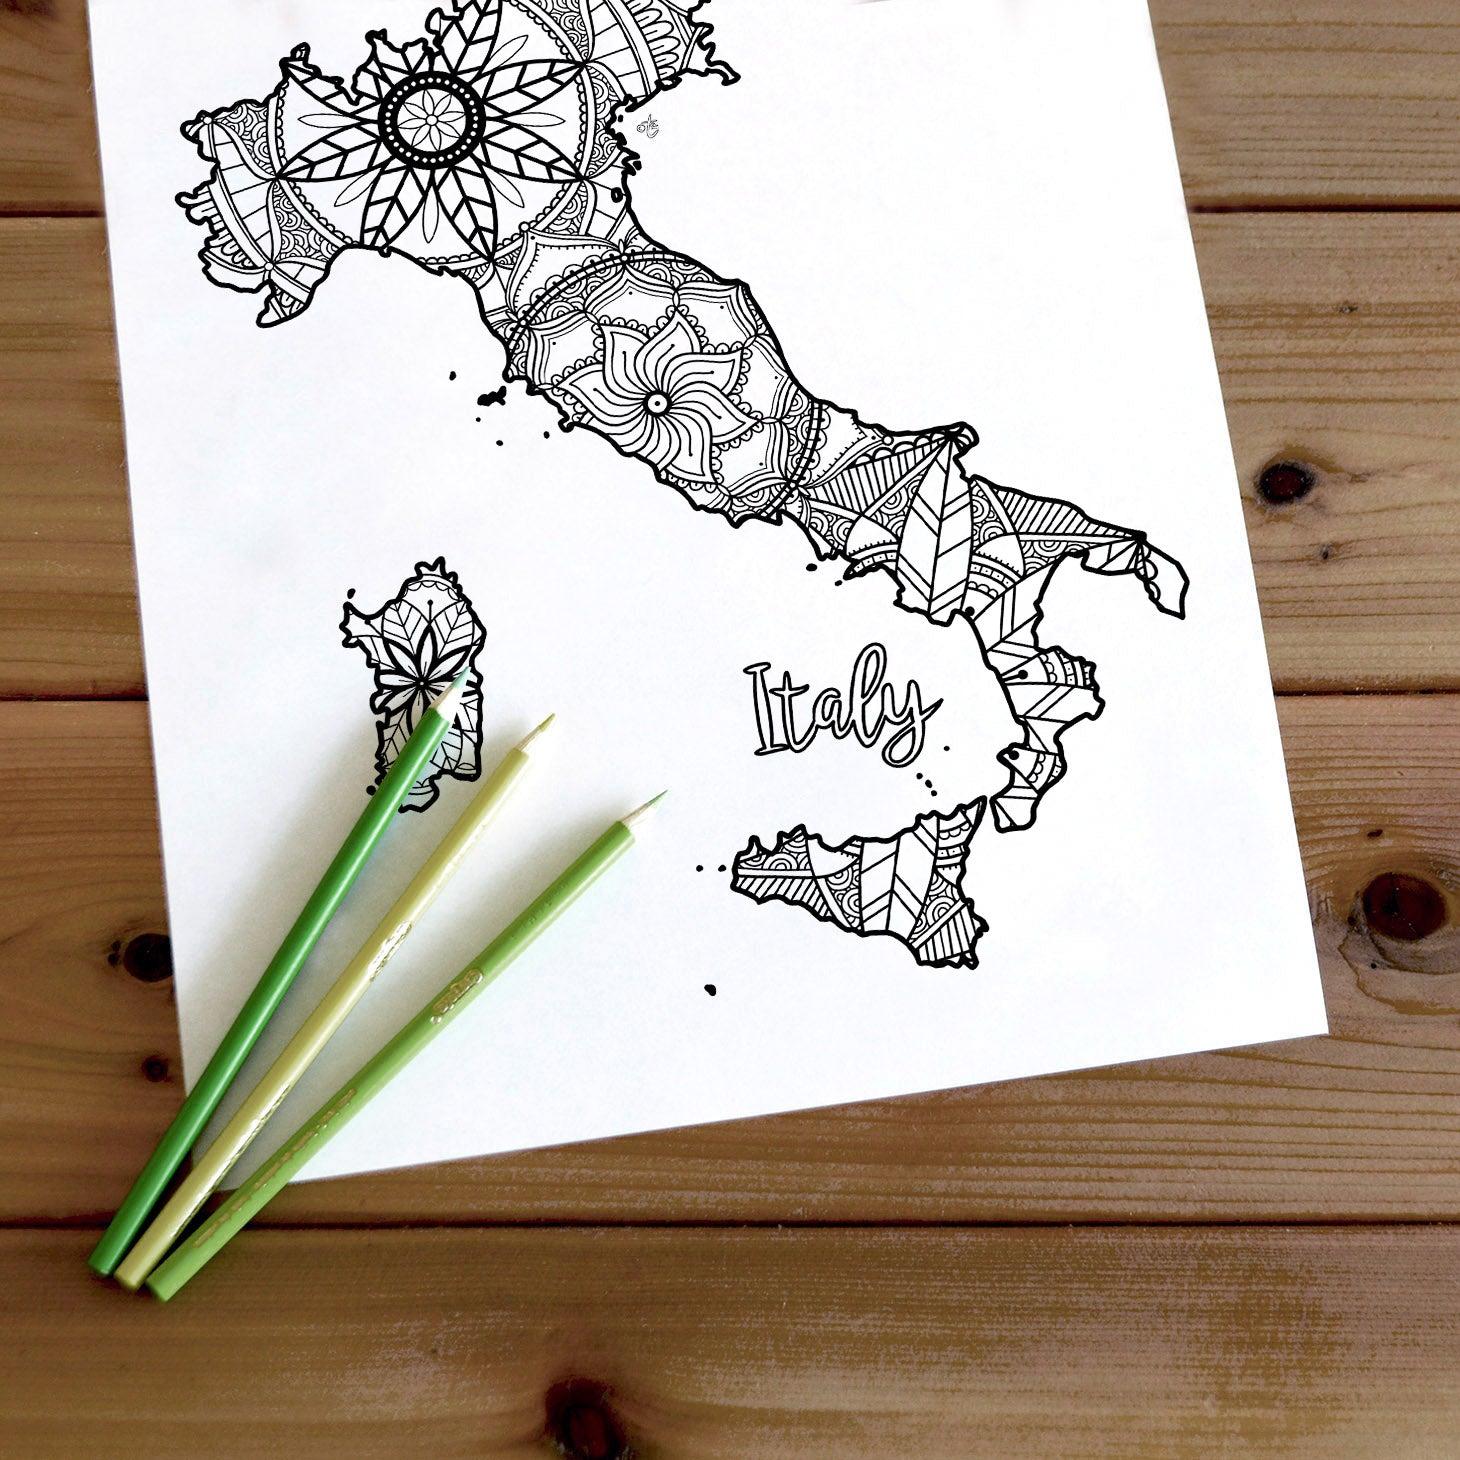 boundaries coloring pages